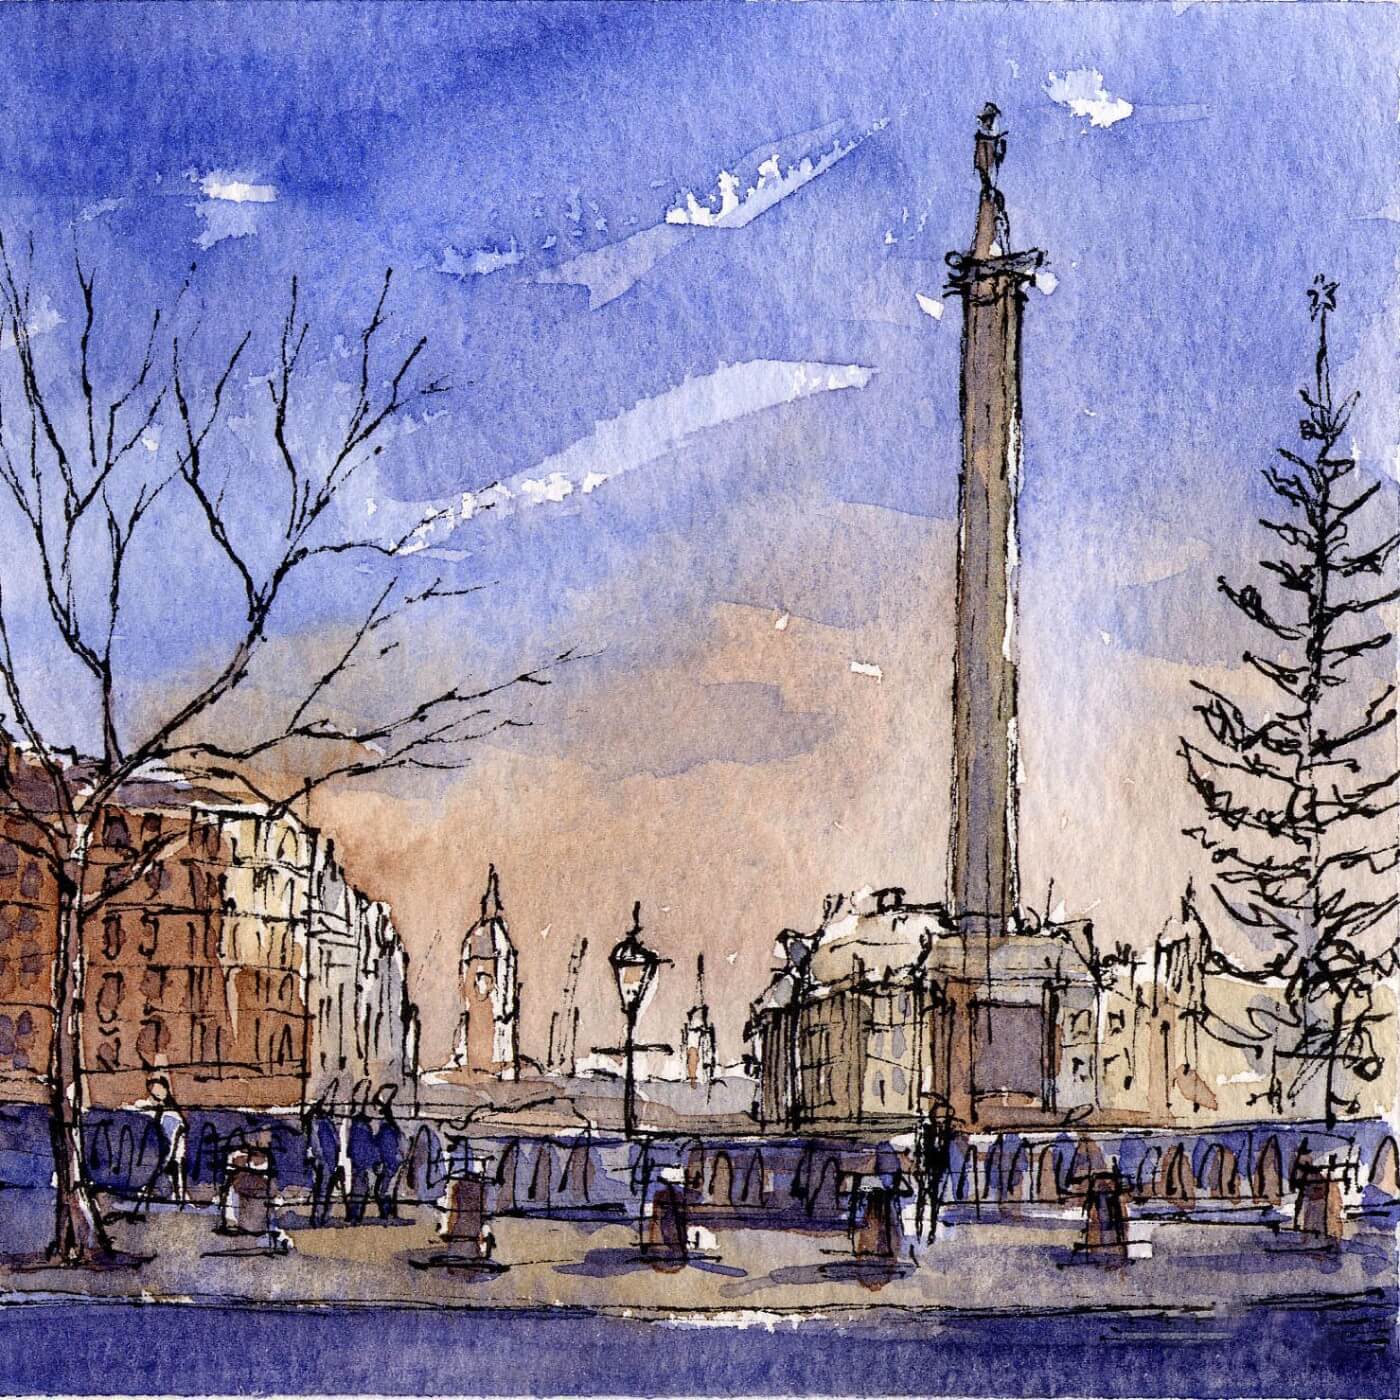 Trafalgar Square - Watercolor - London Photo And Painting Collection - Canvas Prints By Sarah | Buy Posters, Frames, Canvas & Digital Art Prints | Small, Compact, Medium And Large Variants